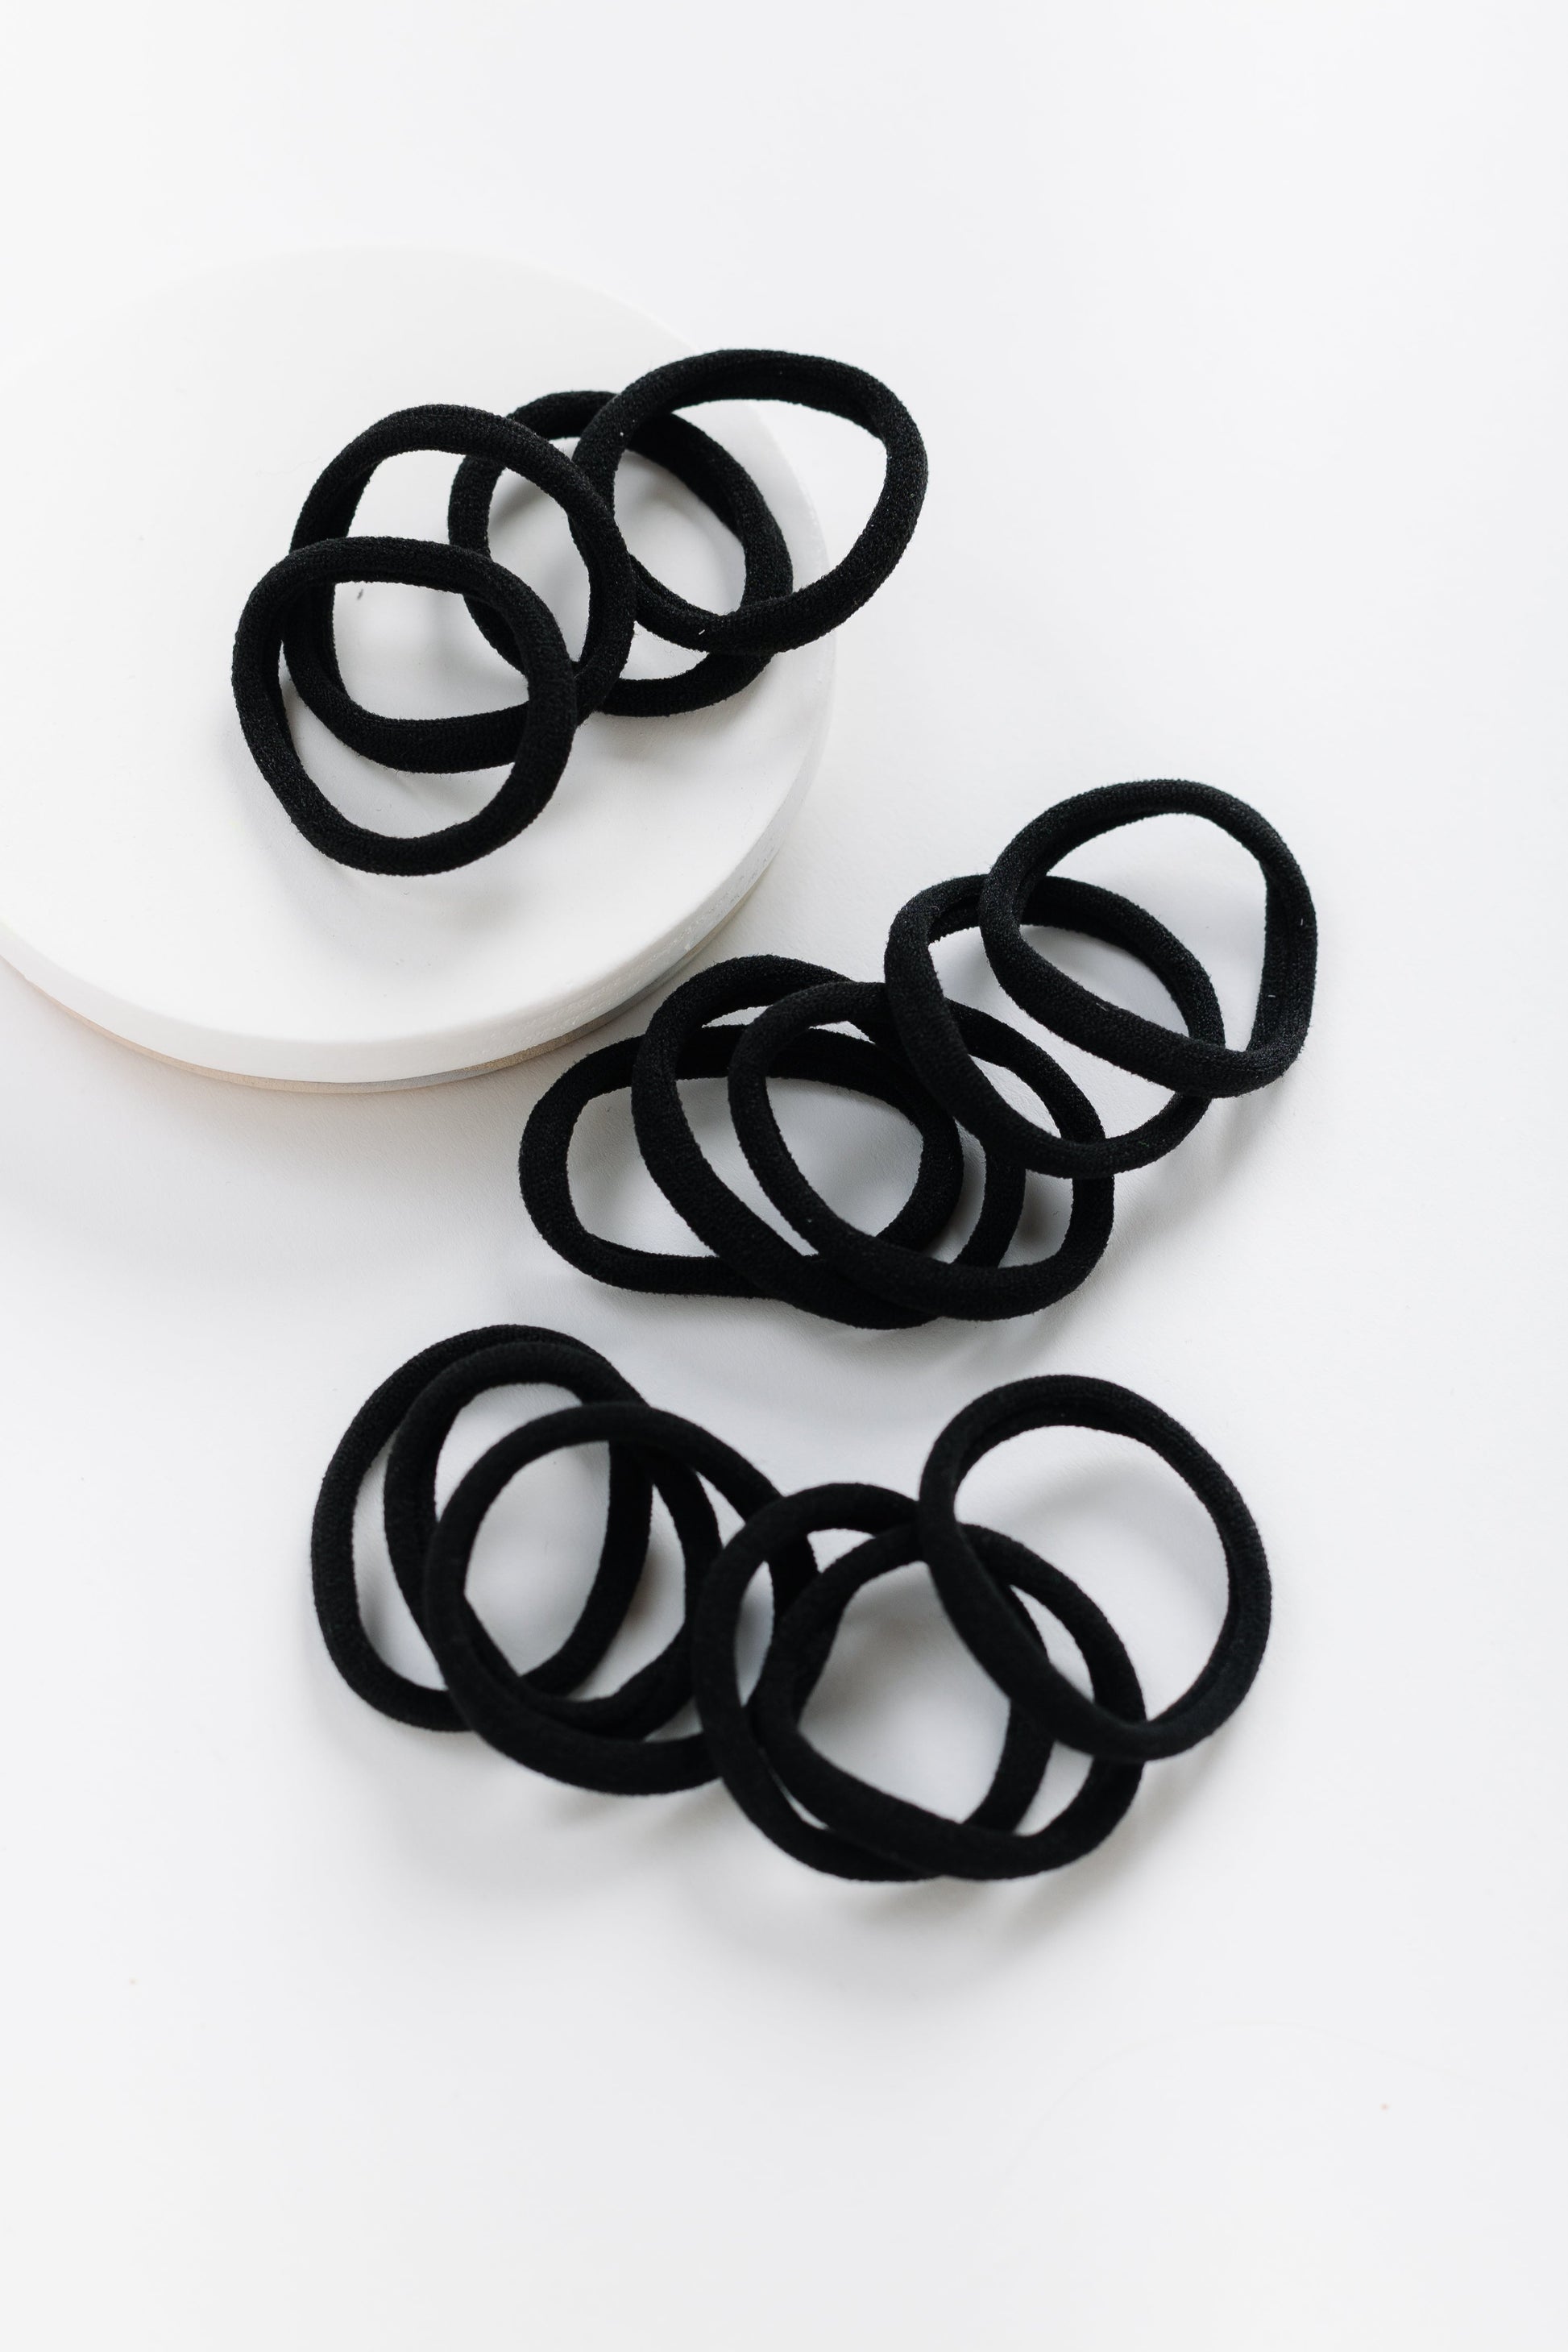 Cove Hair Ties - Set of 10 WOMEN'S HAIR ACCESSORY Cove Accessories Black OS 